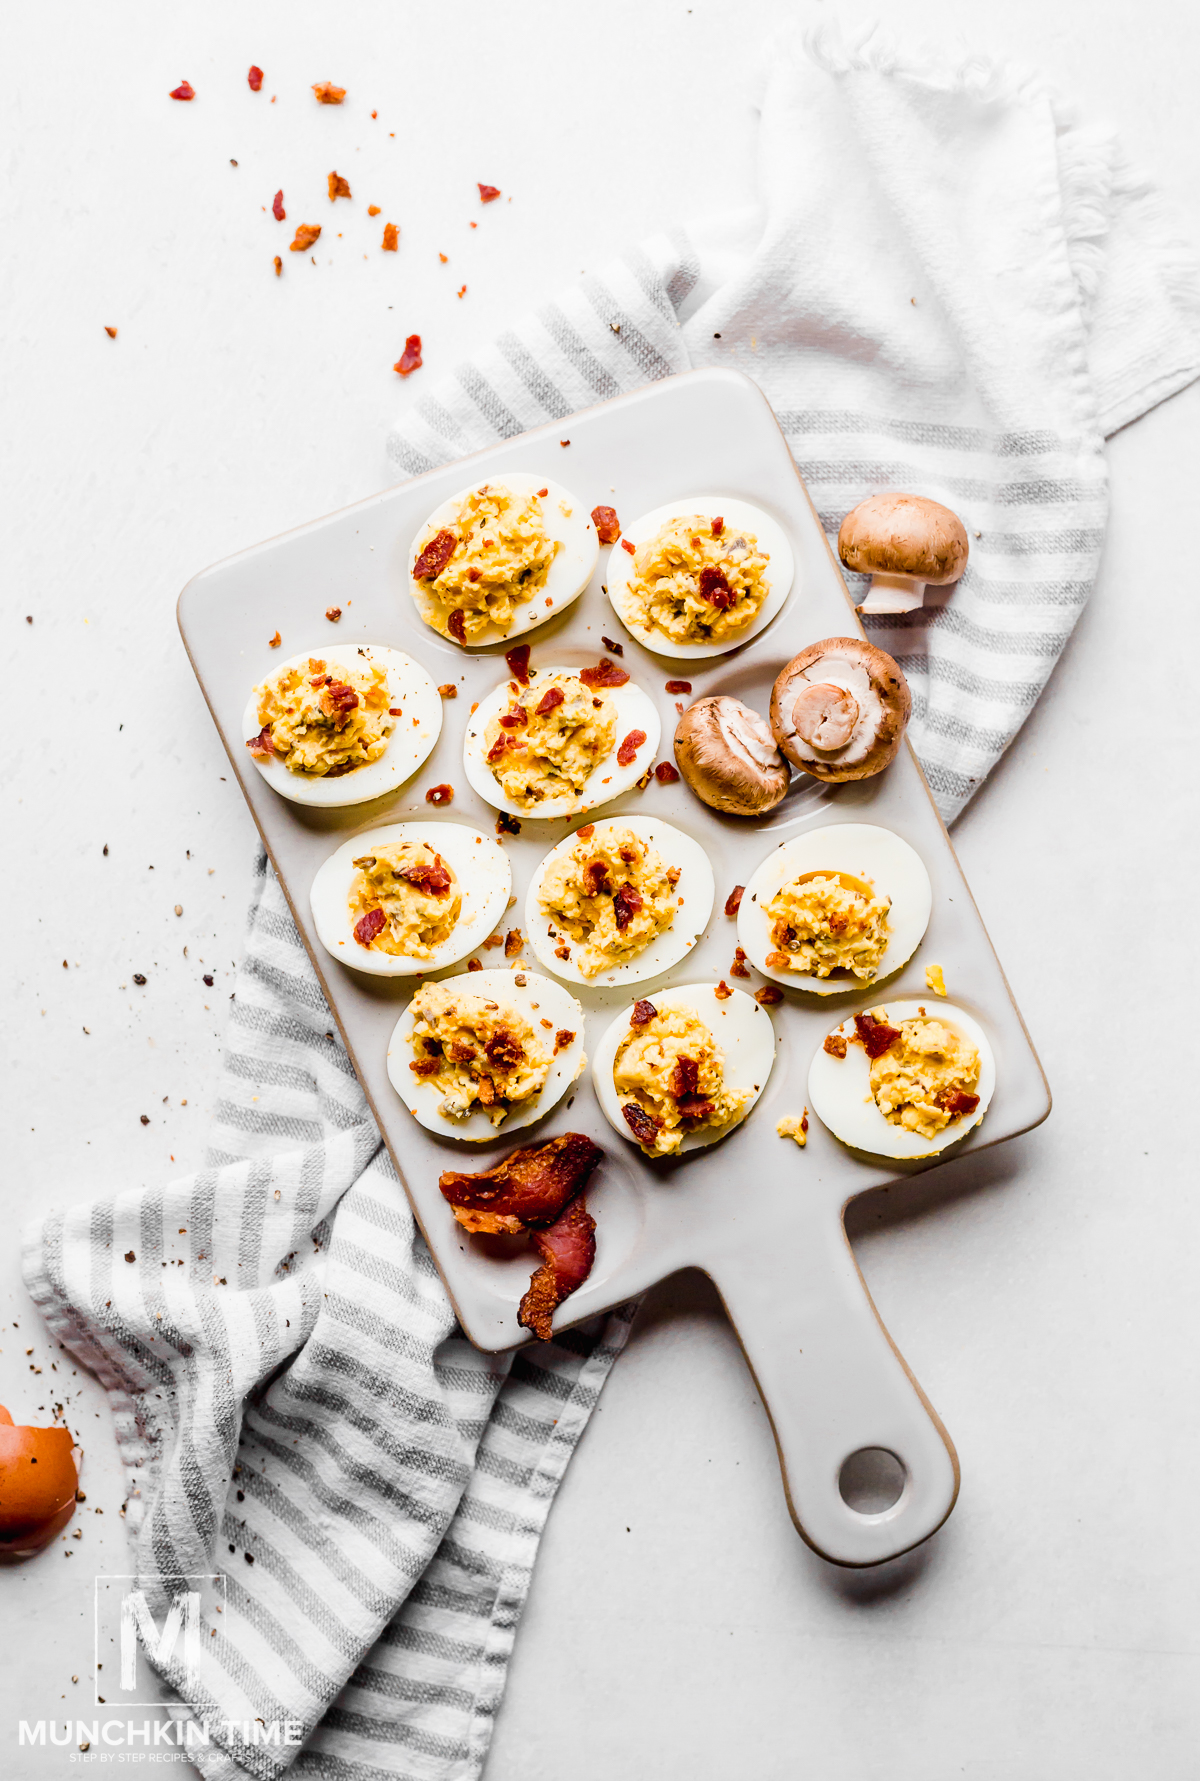 Best Deviled Eggs with Bacon (Instant Pot Hard Boiled Eggs)